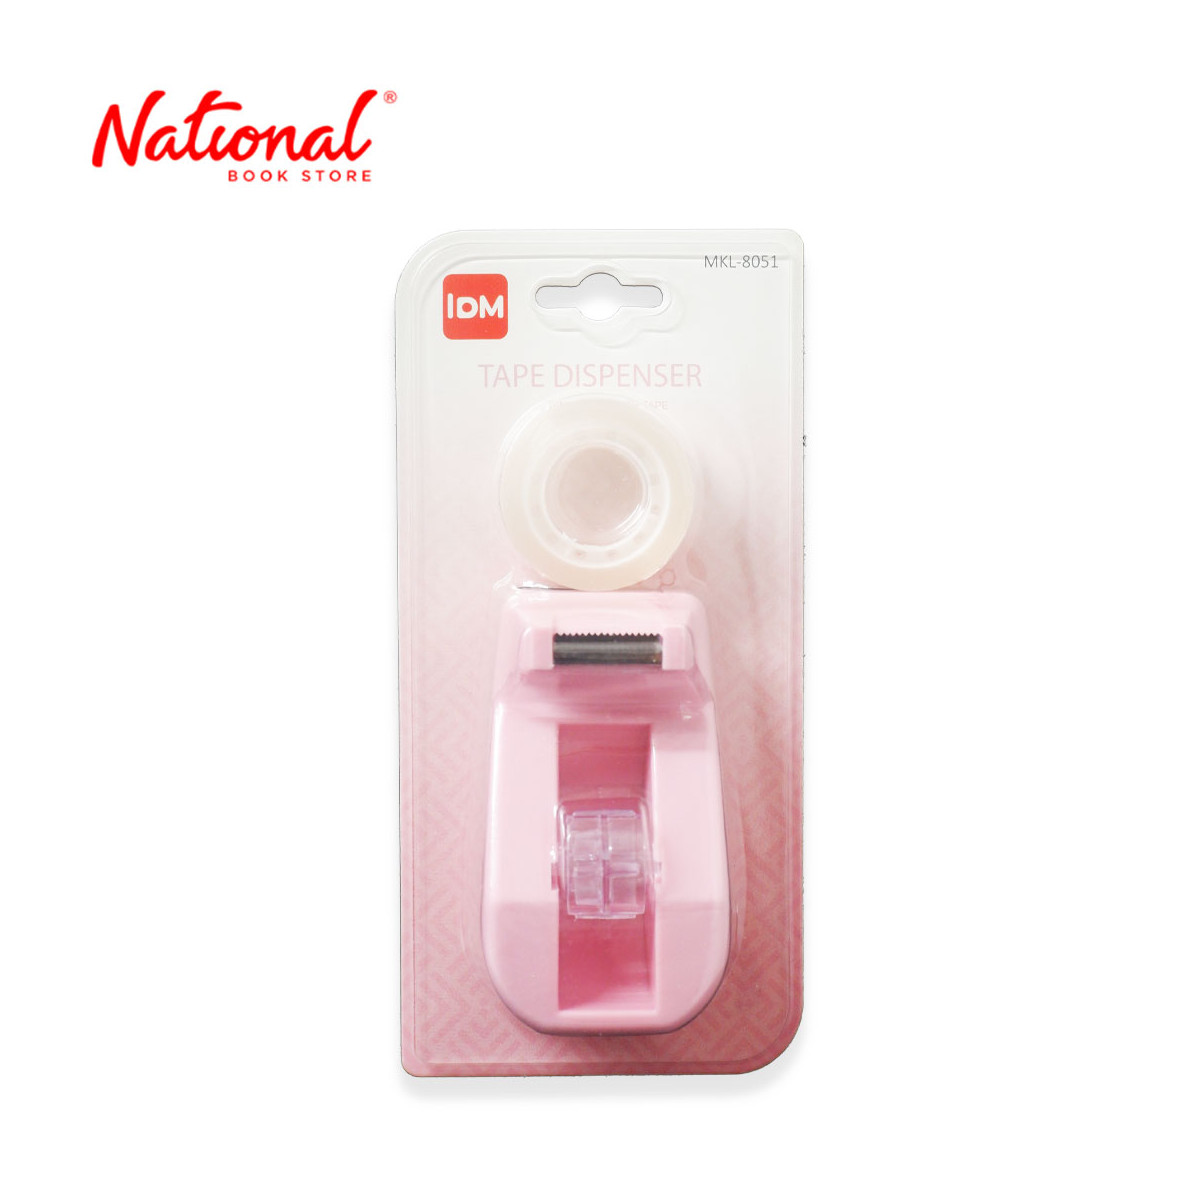 Tape Dispenser MKLl-8051 Pink Mini with Tape - Home & Office Accessories